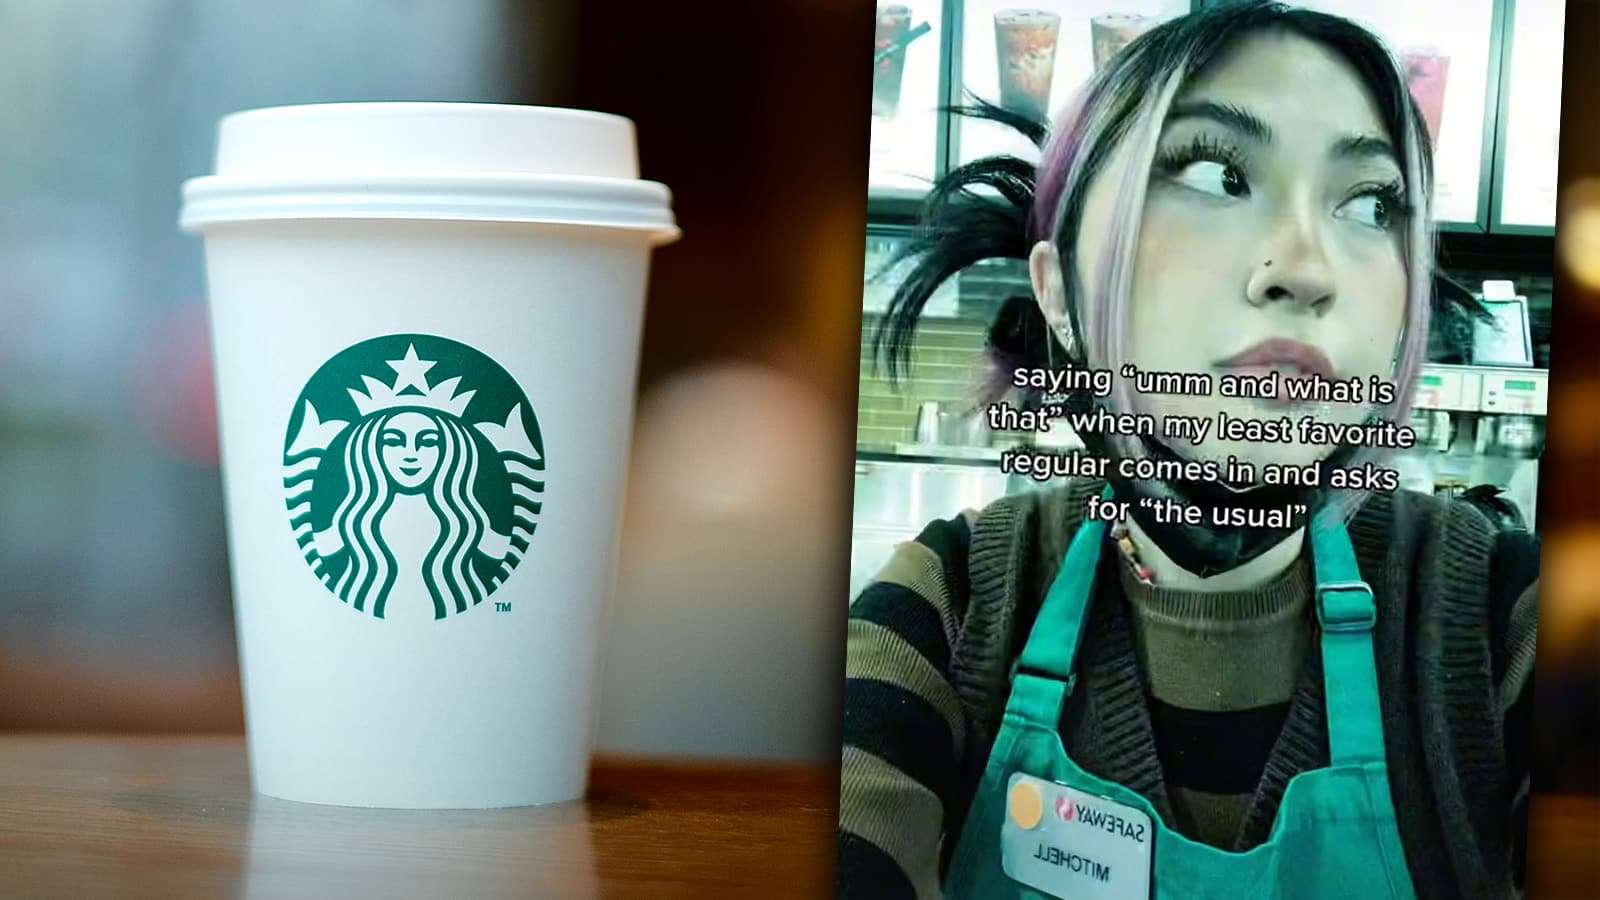 TikToker goes viral for showing how she humbles annoying customers